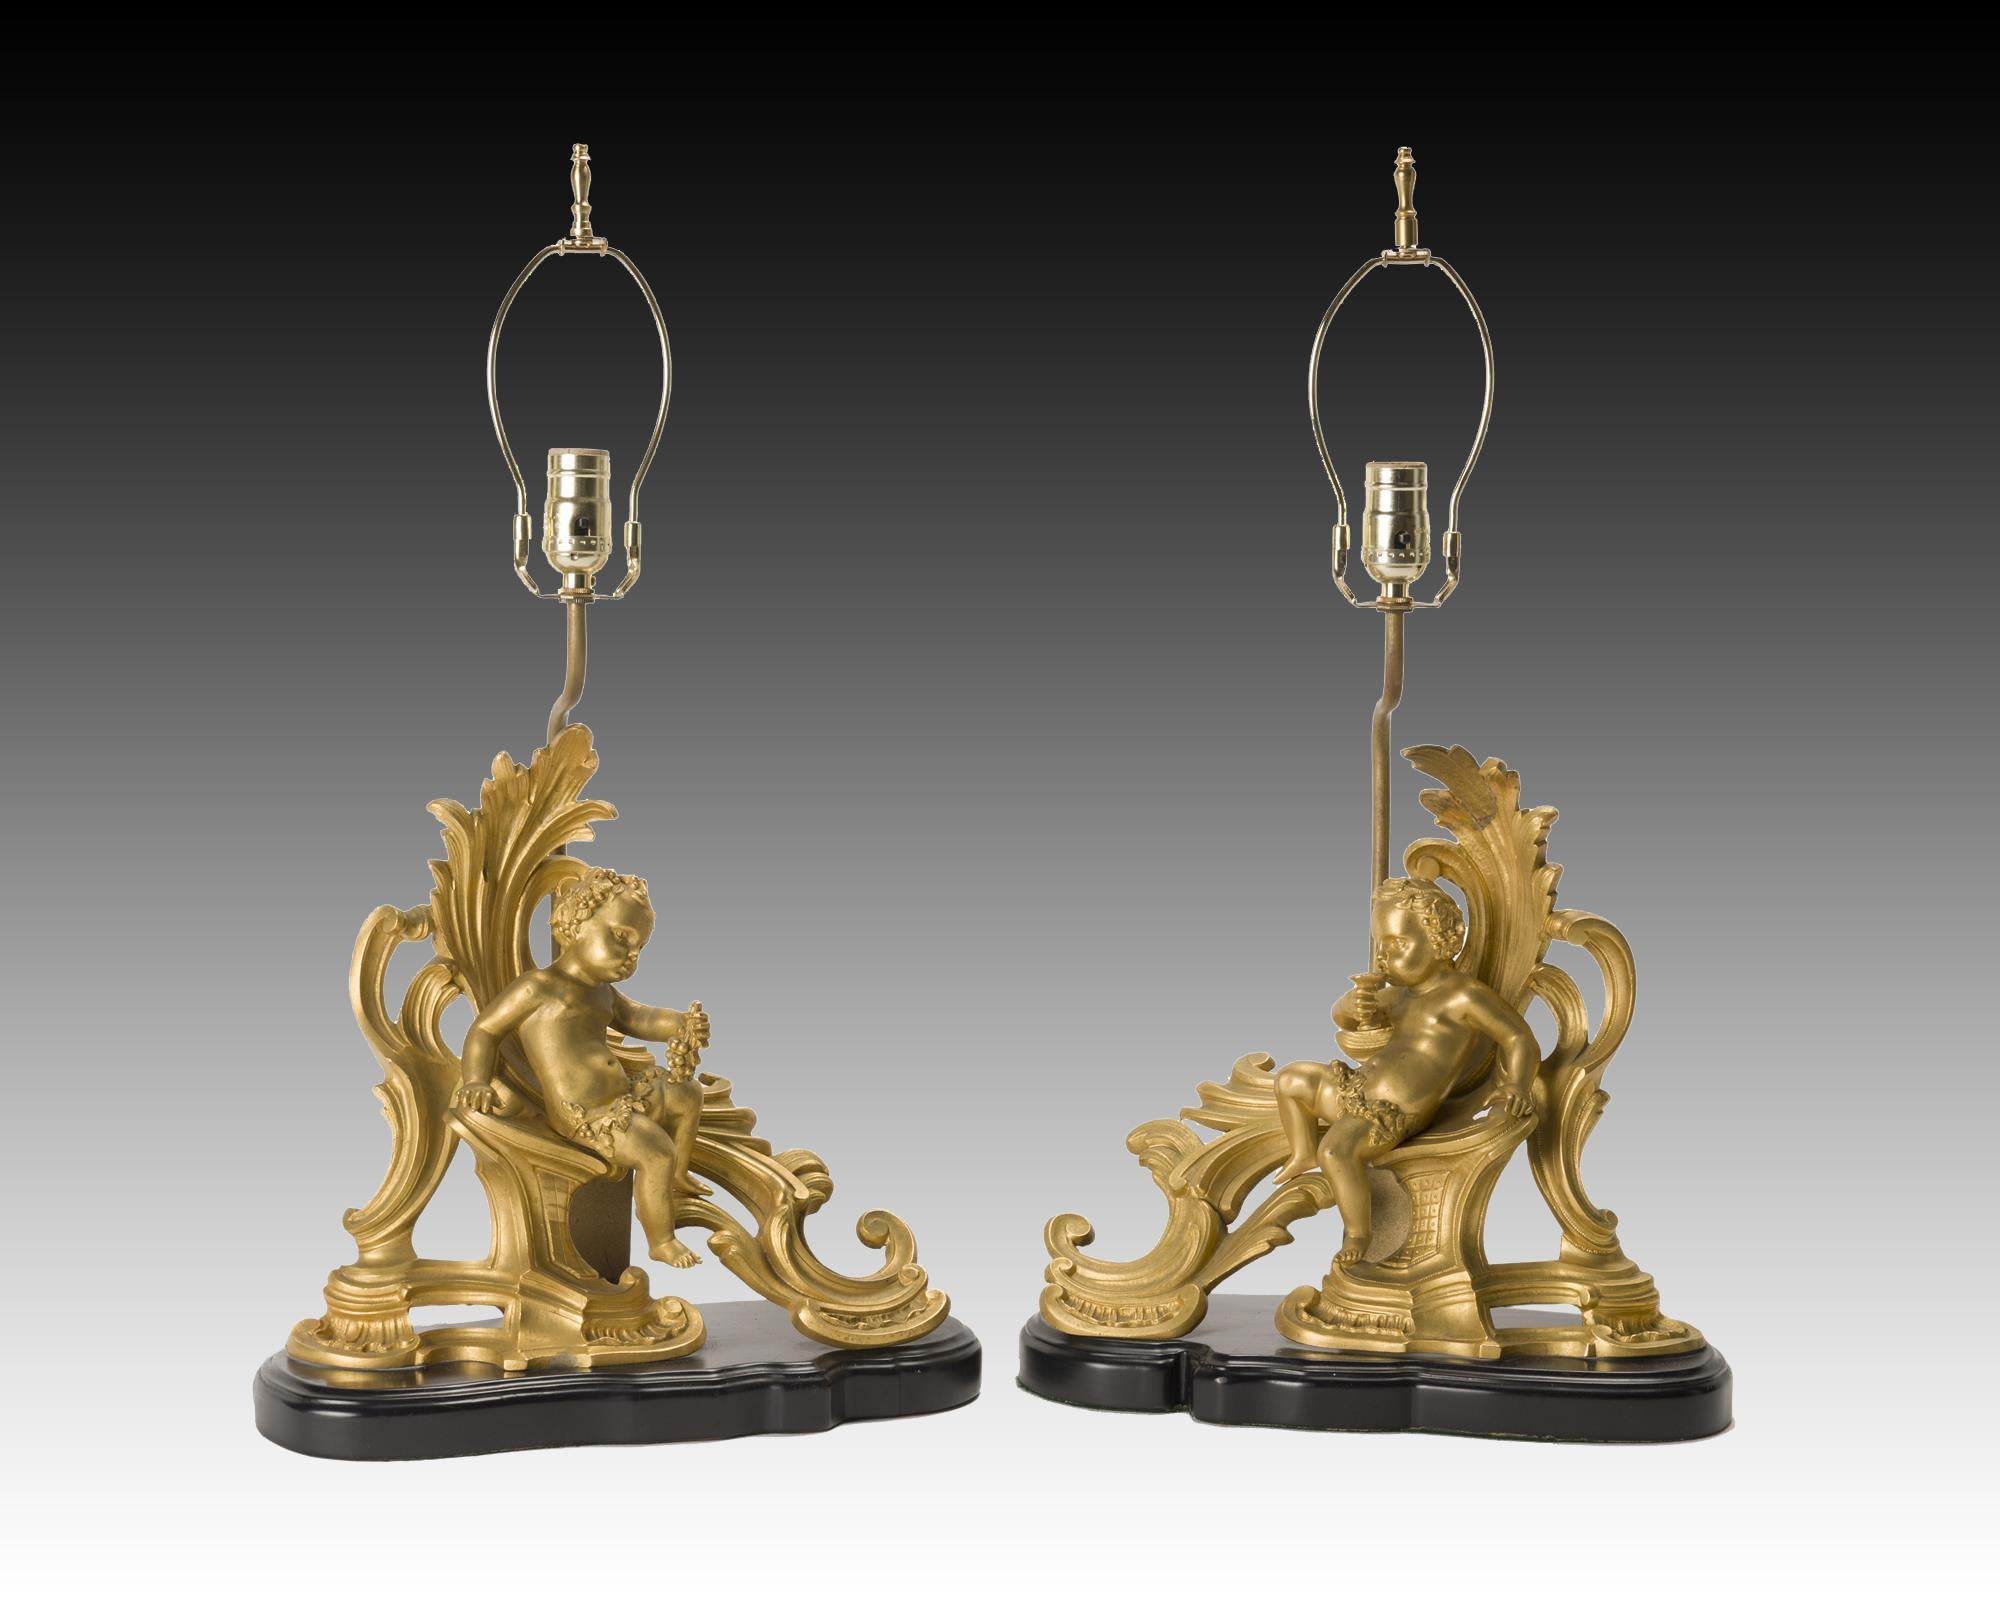 Carved Pair of French Ormolu Gilt Bronze Chenet Mounted Lamps